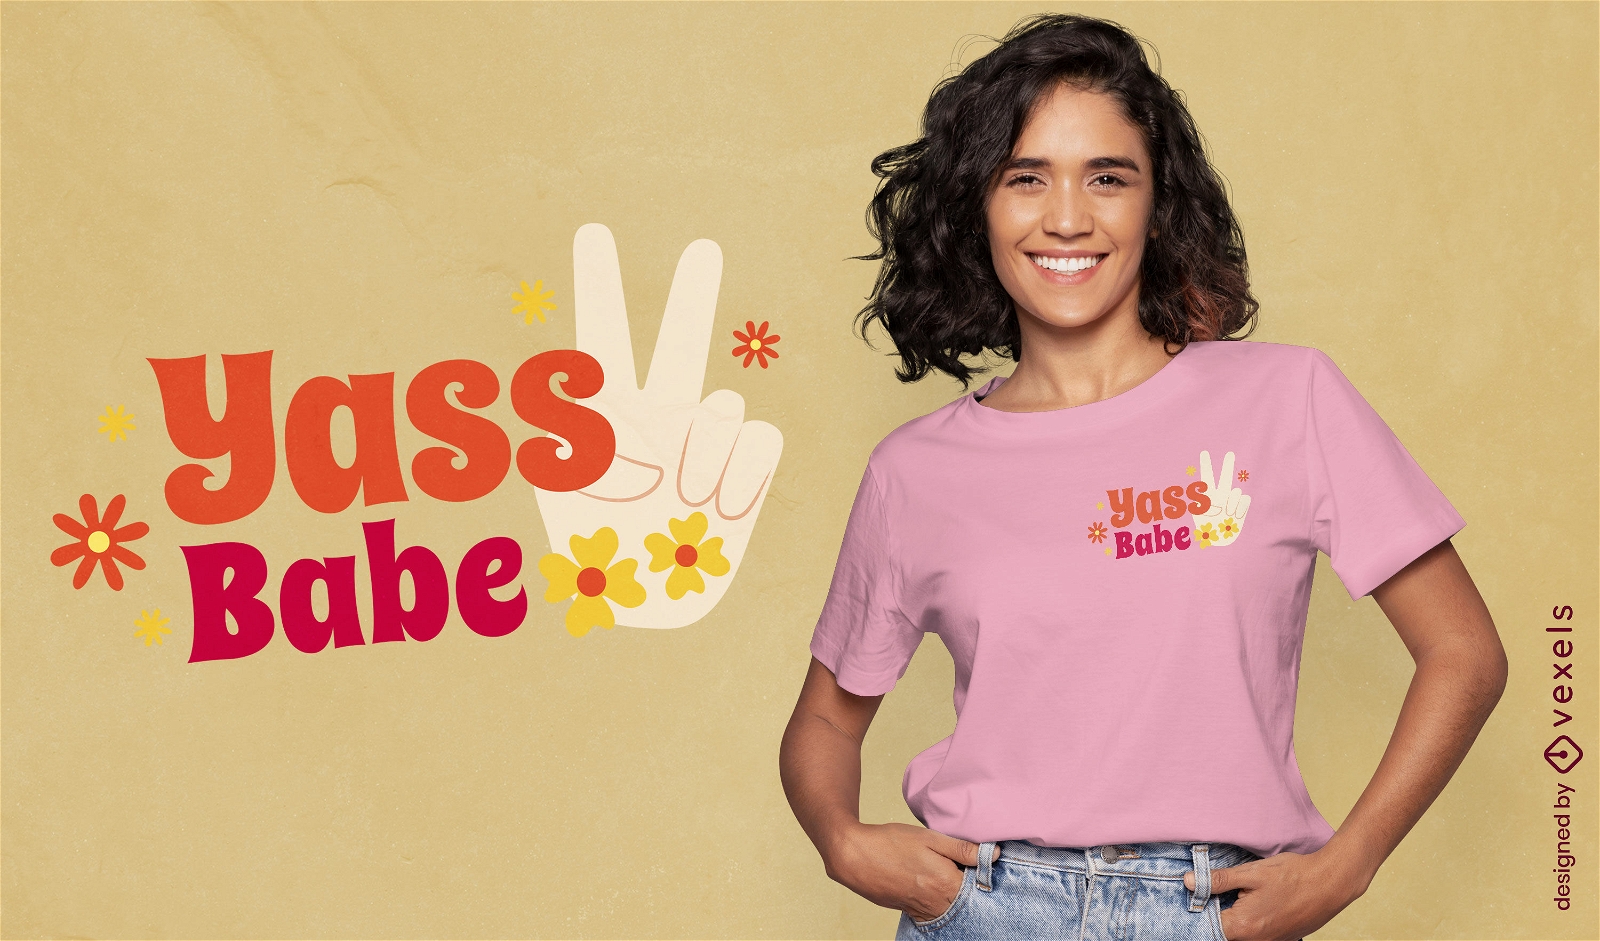 Yass babe quote t-shirt design